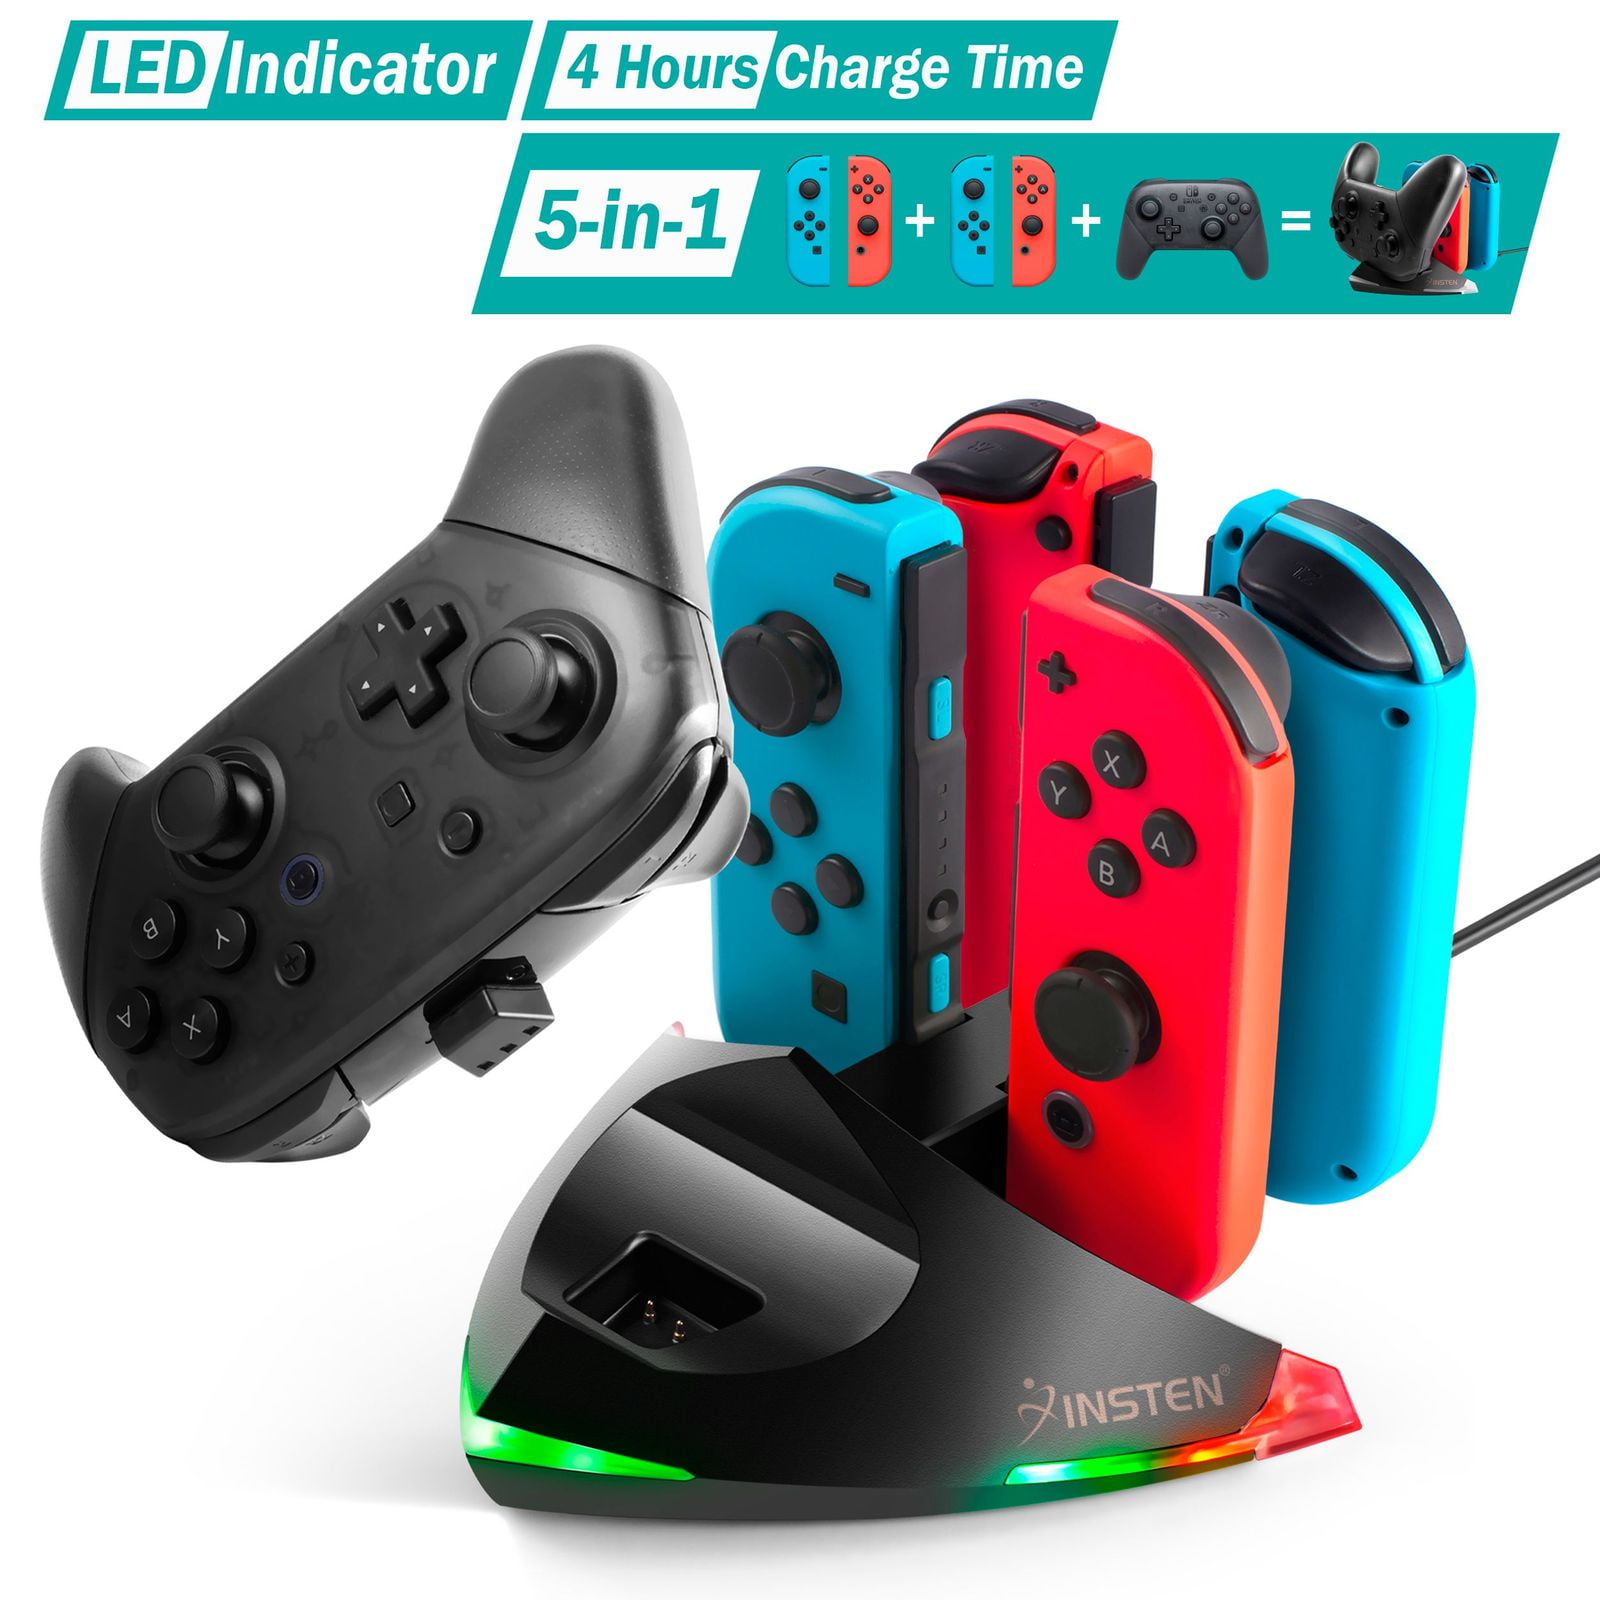 For Nintendo Switch and OLED Model 2021 Joycon and Pro Controllers Charger, 5 in 1 Joy Con Charging Dock with Light and USB Type Charging Cable - Walmart.com